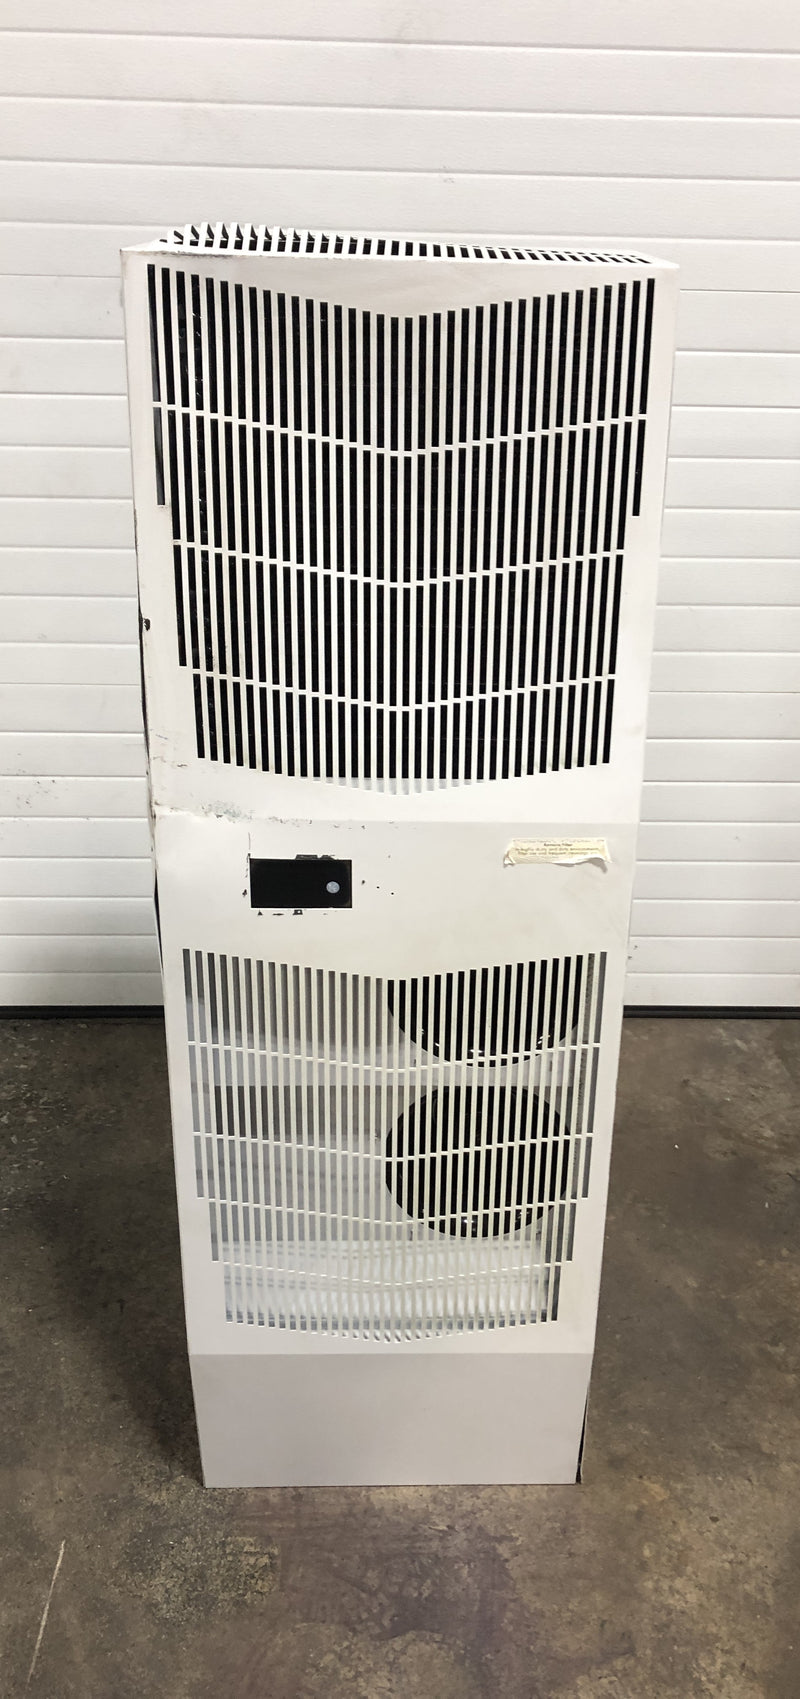 Nvent G521246G050 Cooling Air Conditioner 3PH